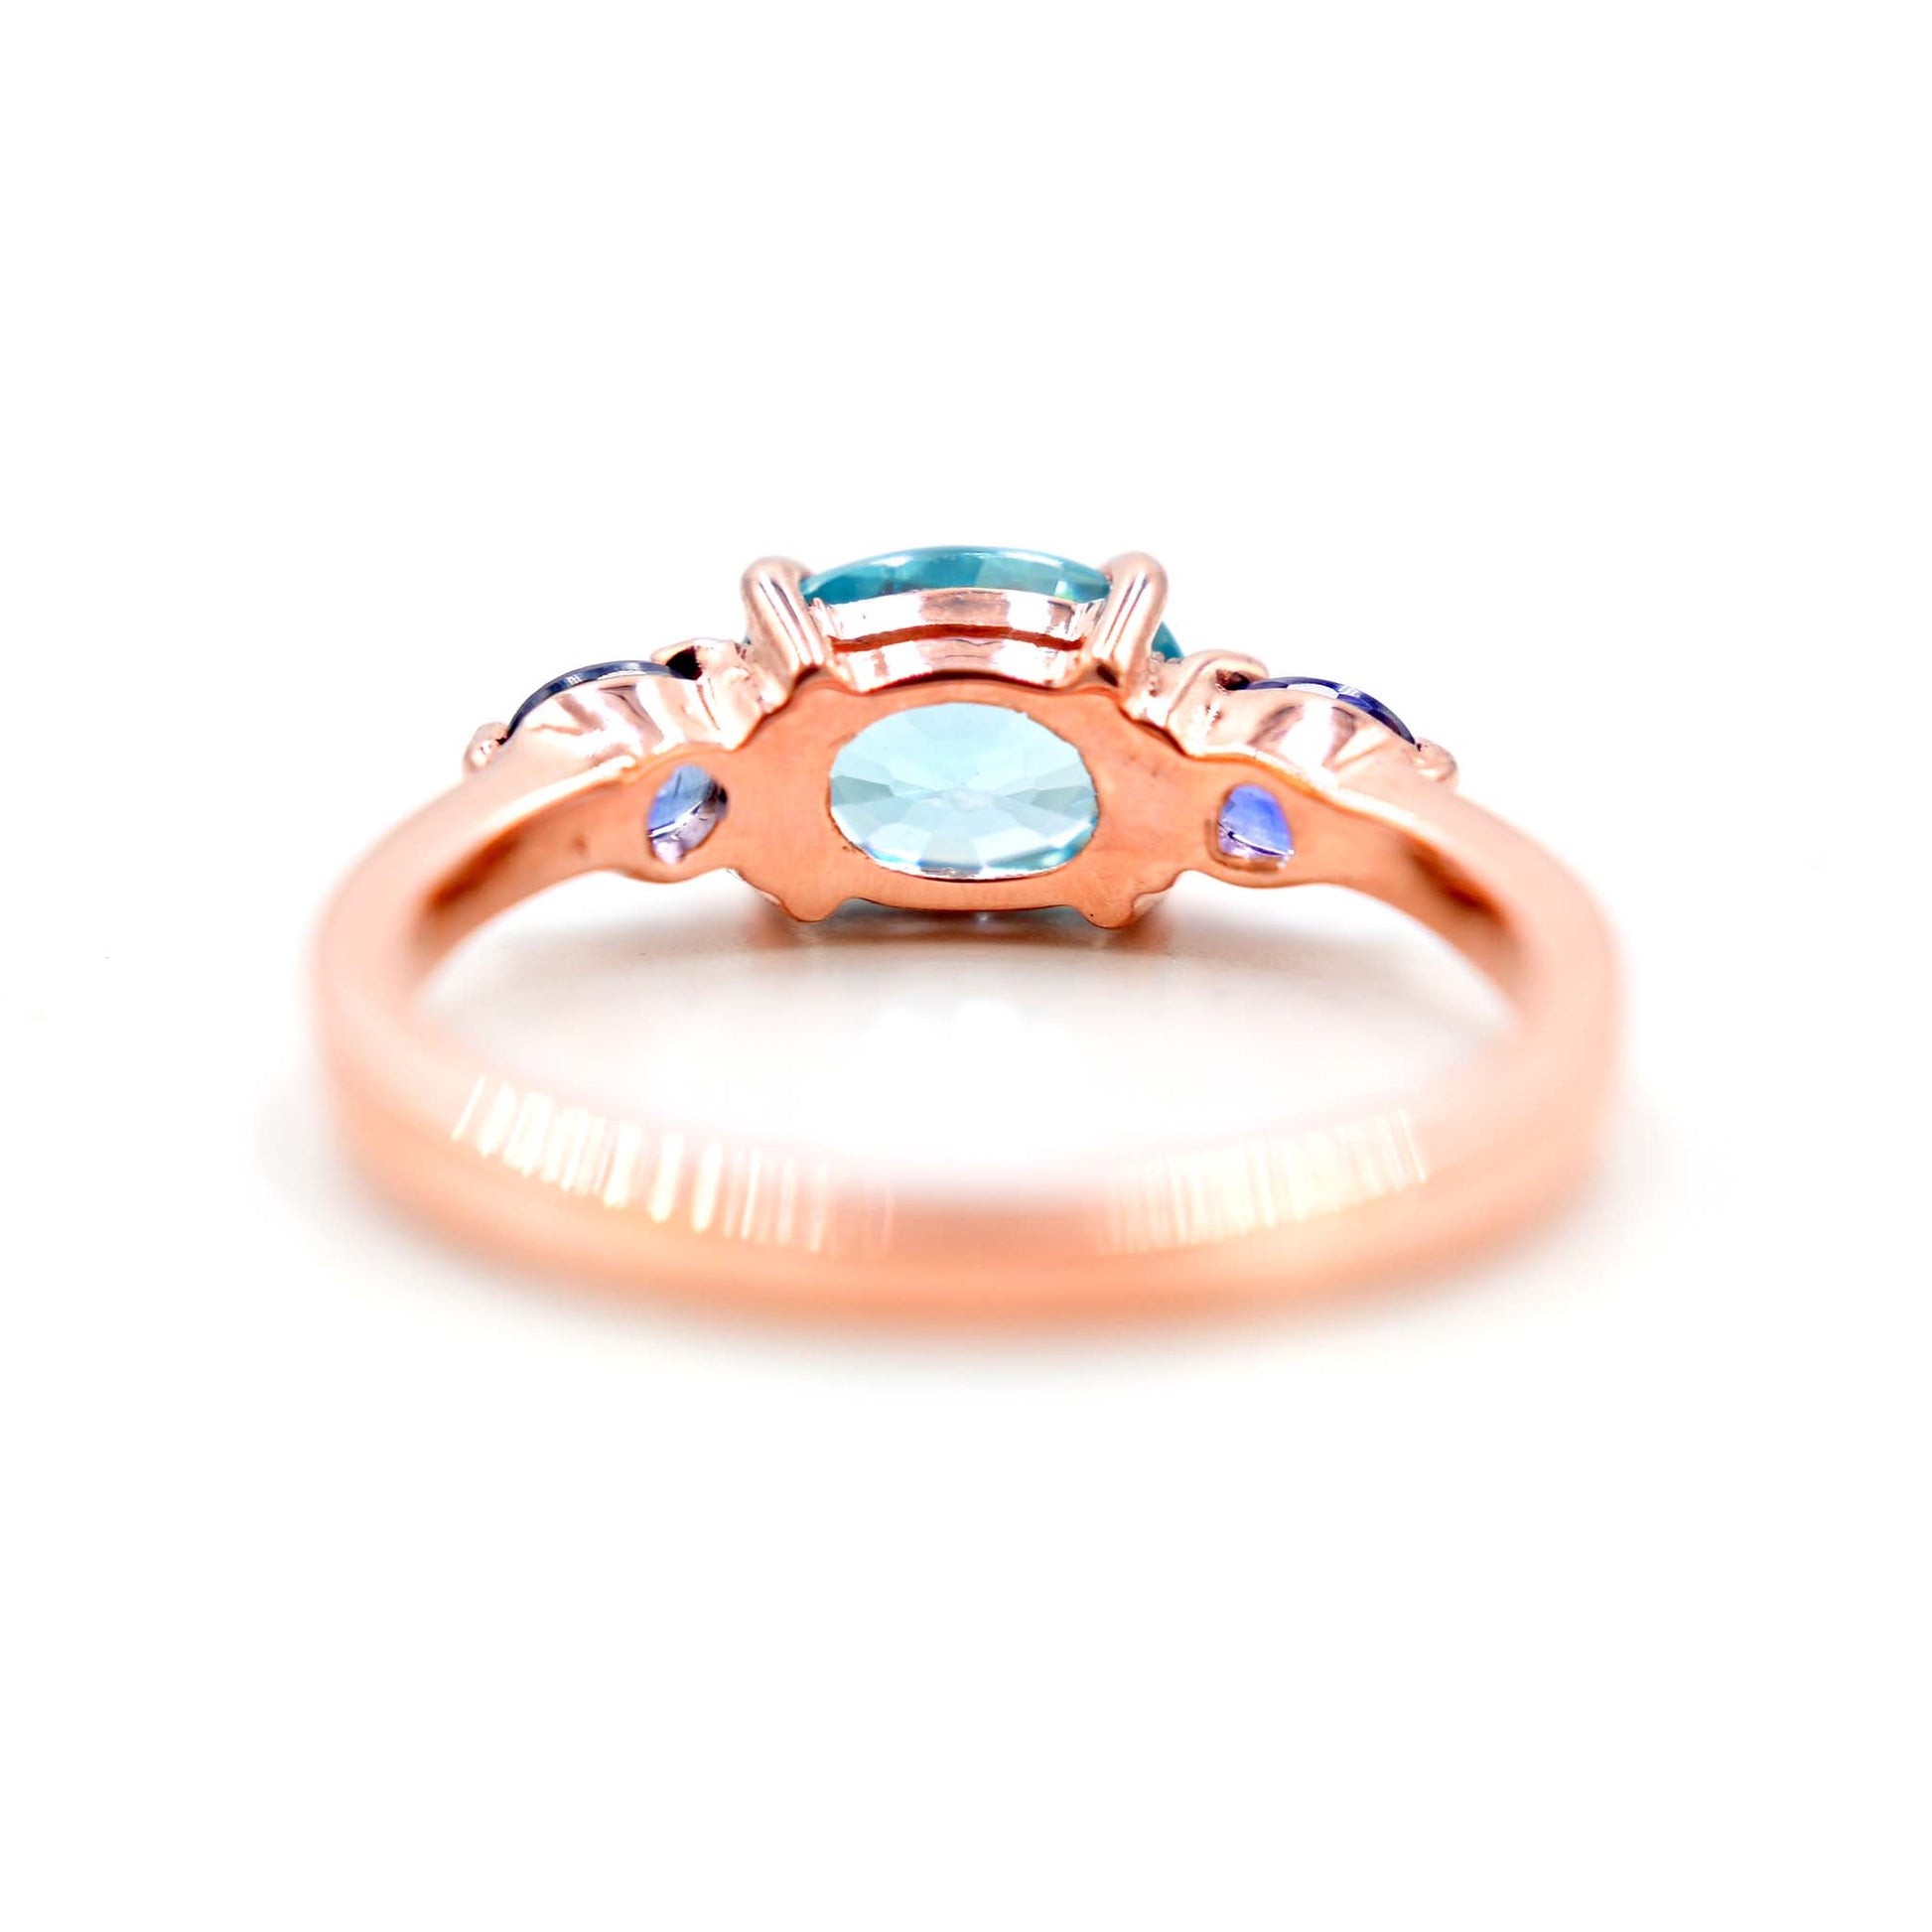 Back view of the Skylite Rose 14k ring. Handmade in Chiang Mai, Thailand